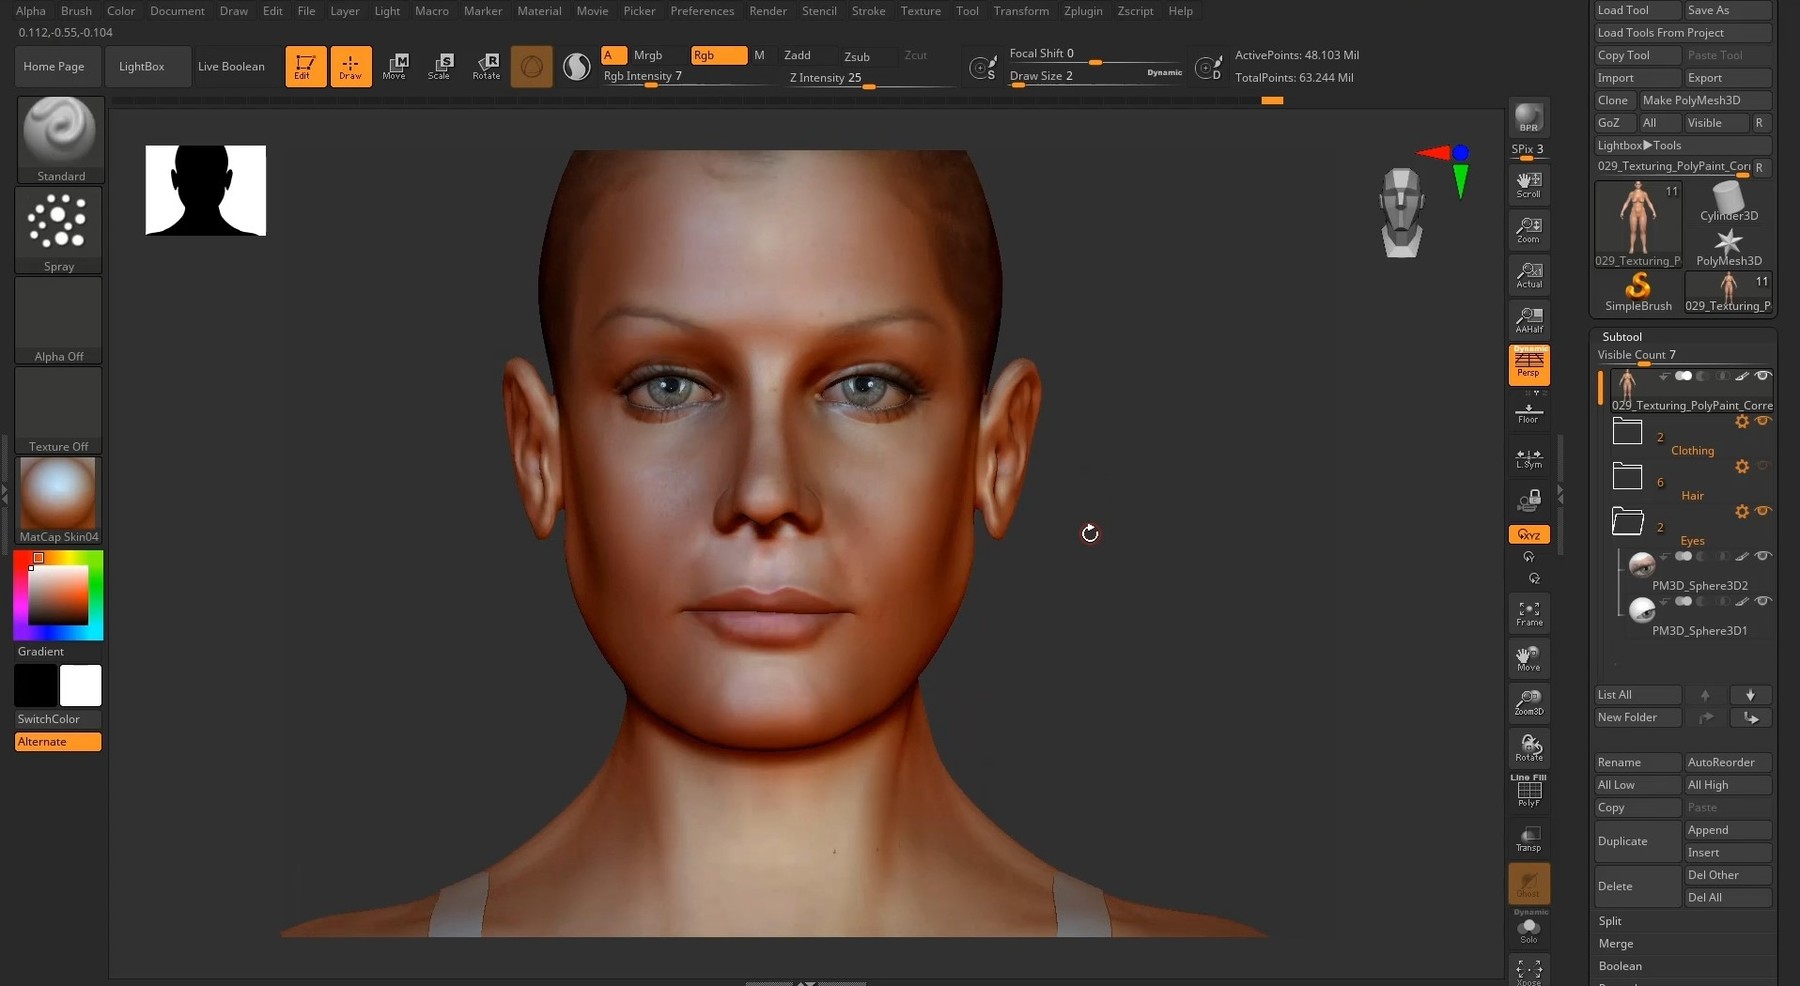 how to do projection painting zbrush